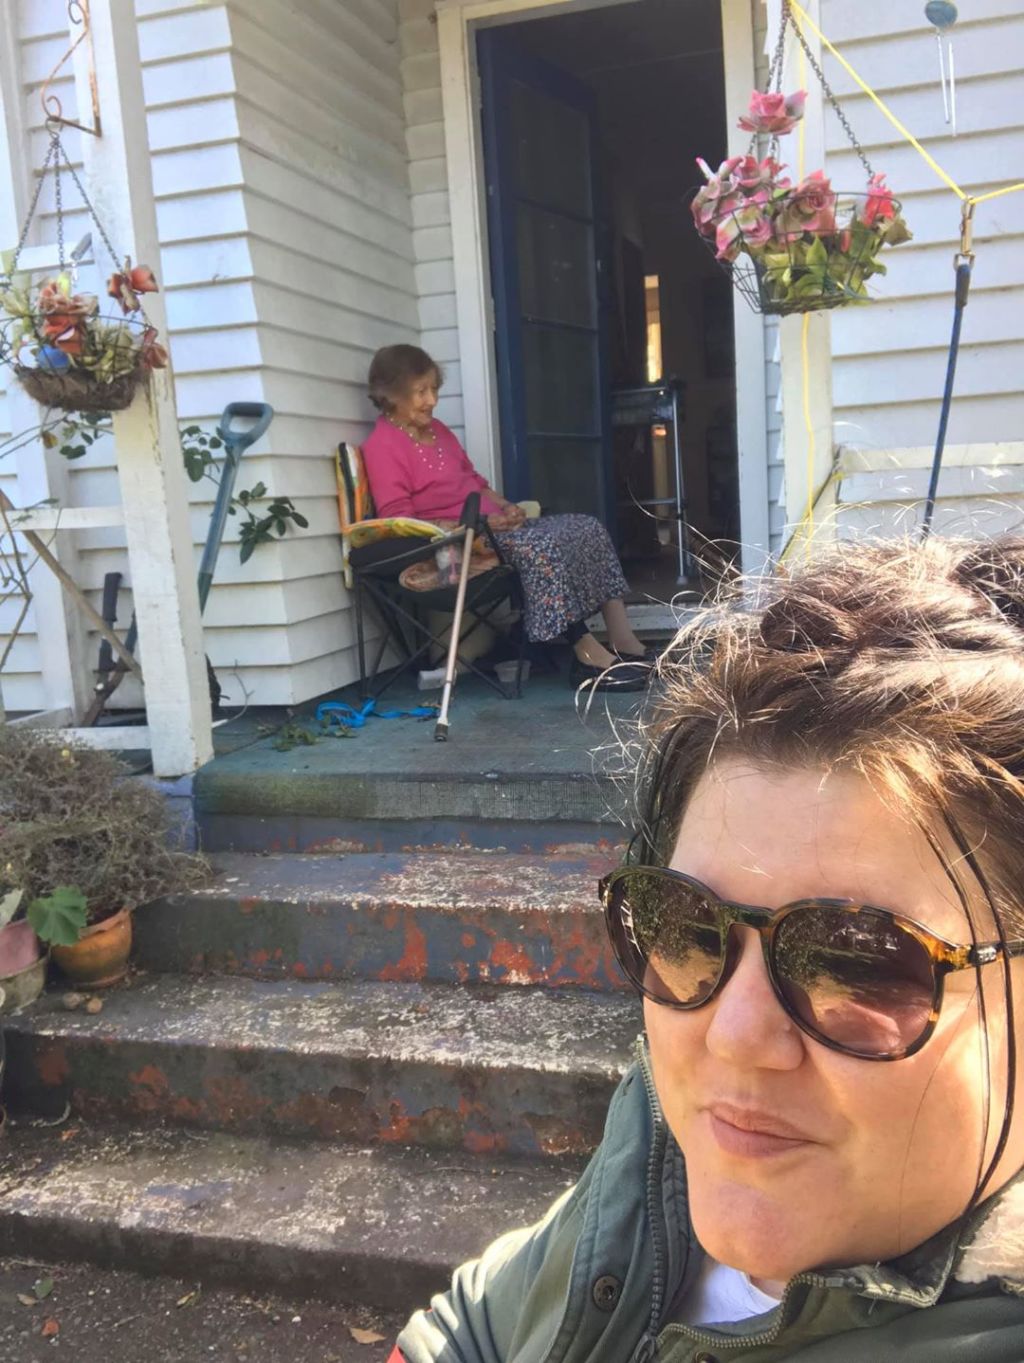 Me and my Nana, Jo Klein, spending some quality time together despite the pandemic. (Please excuse my messy face and hair, I've been working from home for a week and have forgotten what tidy means. Photo: Kylie Klien-Nixon